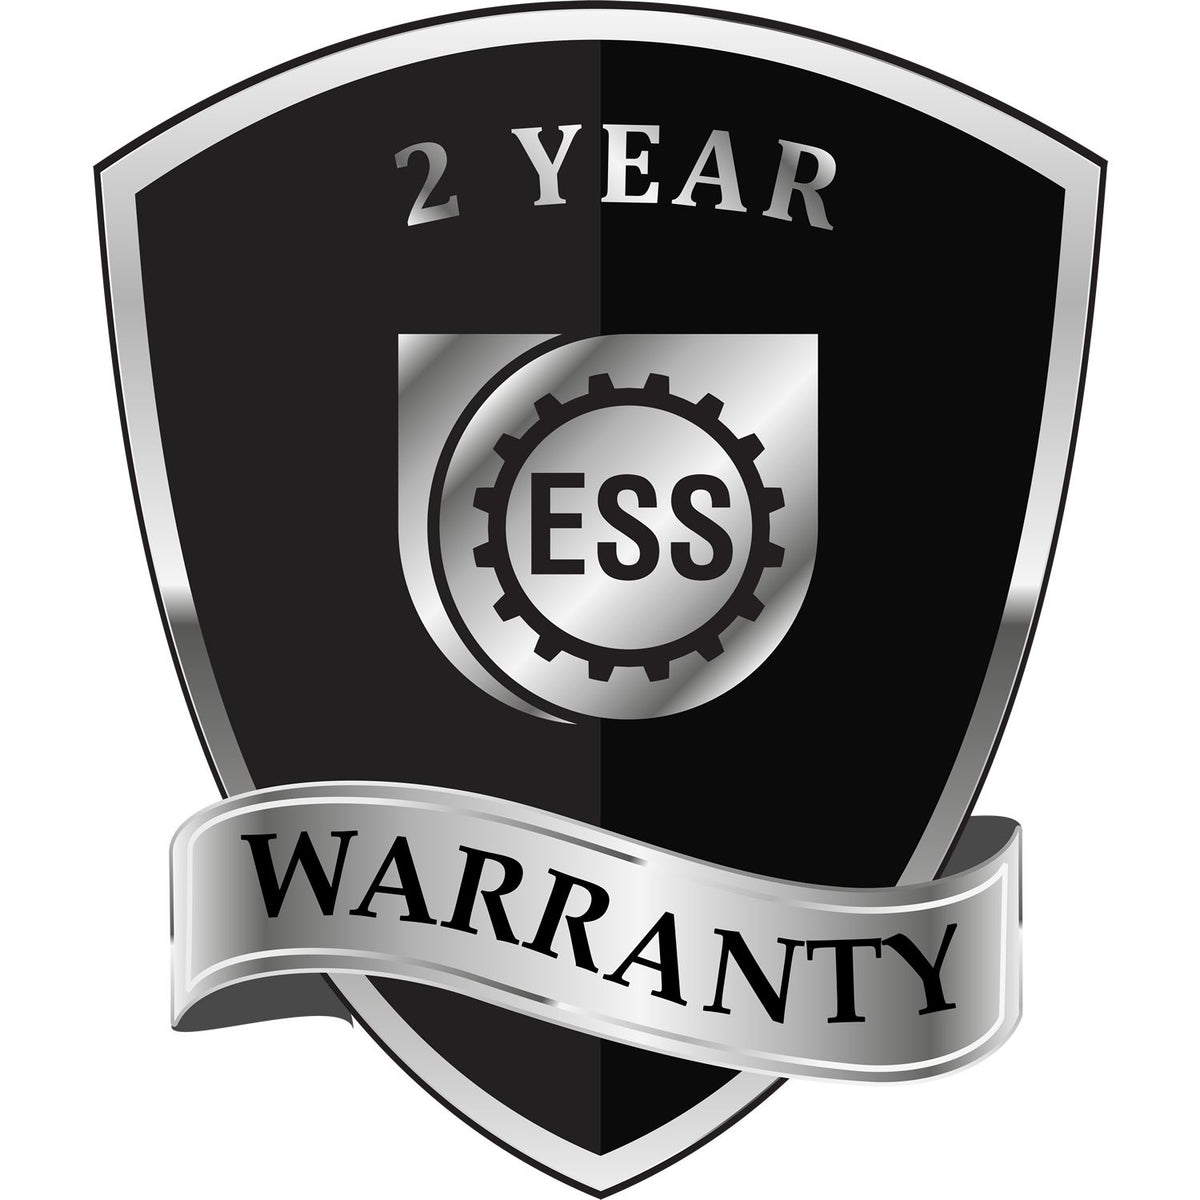 A black and silver badge or emblem showing warranty information for the Gift Michigan Landscape Architect Seal